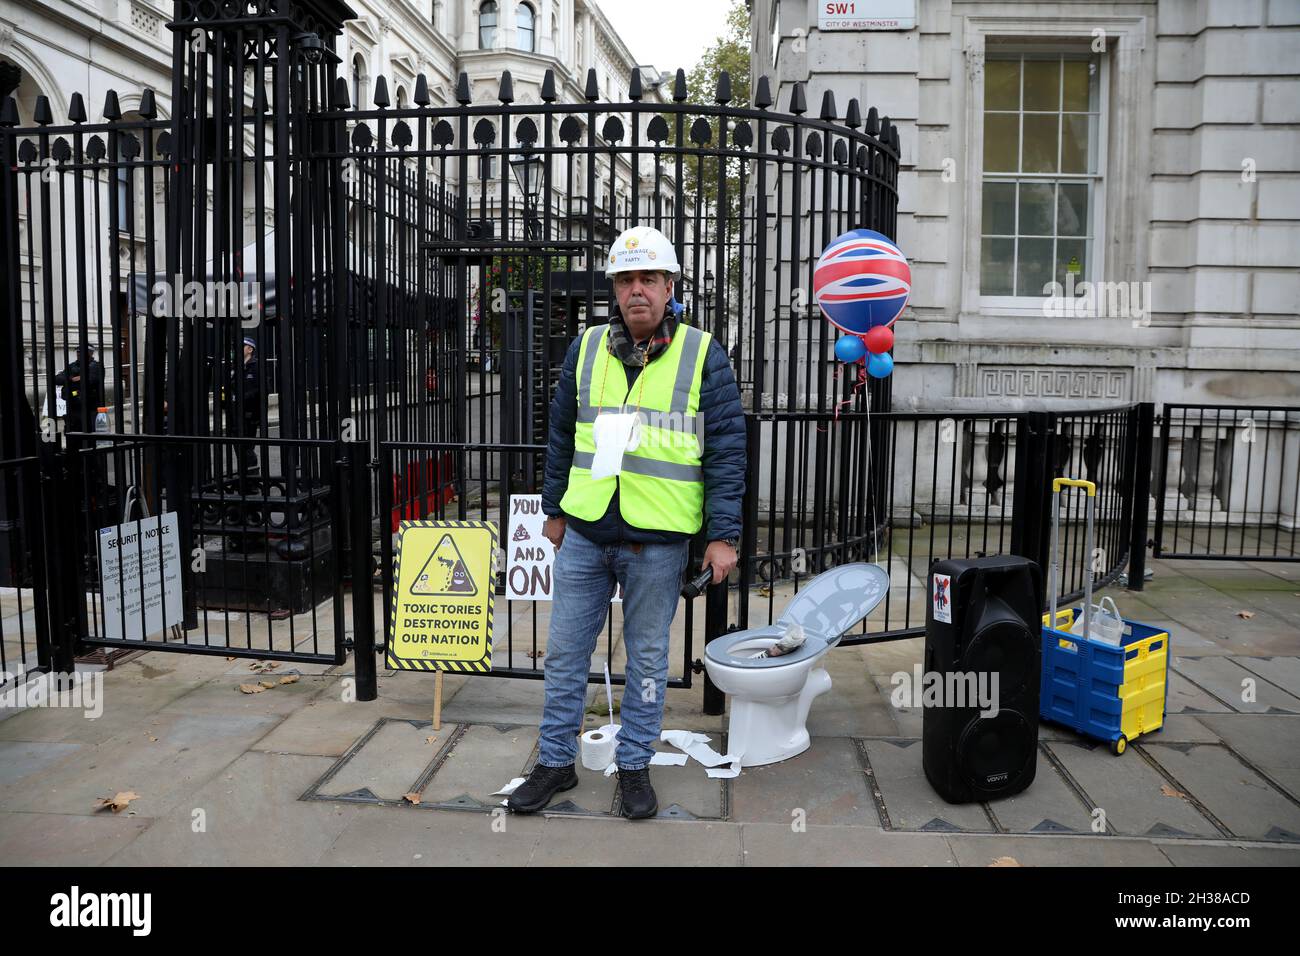 London, UK, 26 October 2021: Activist Steve Bray protesting against the Conservative government outside Downing Street, central London Stock Photo